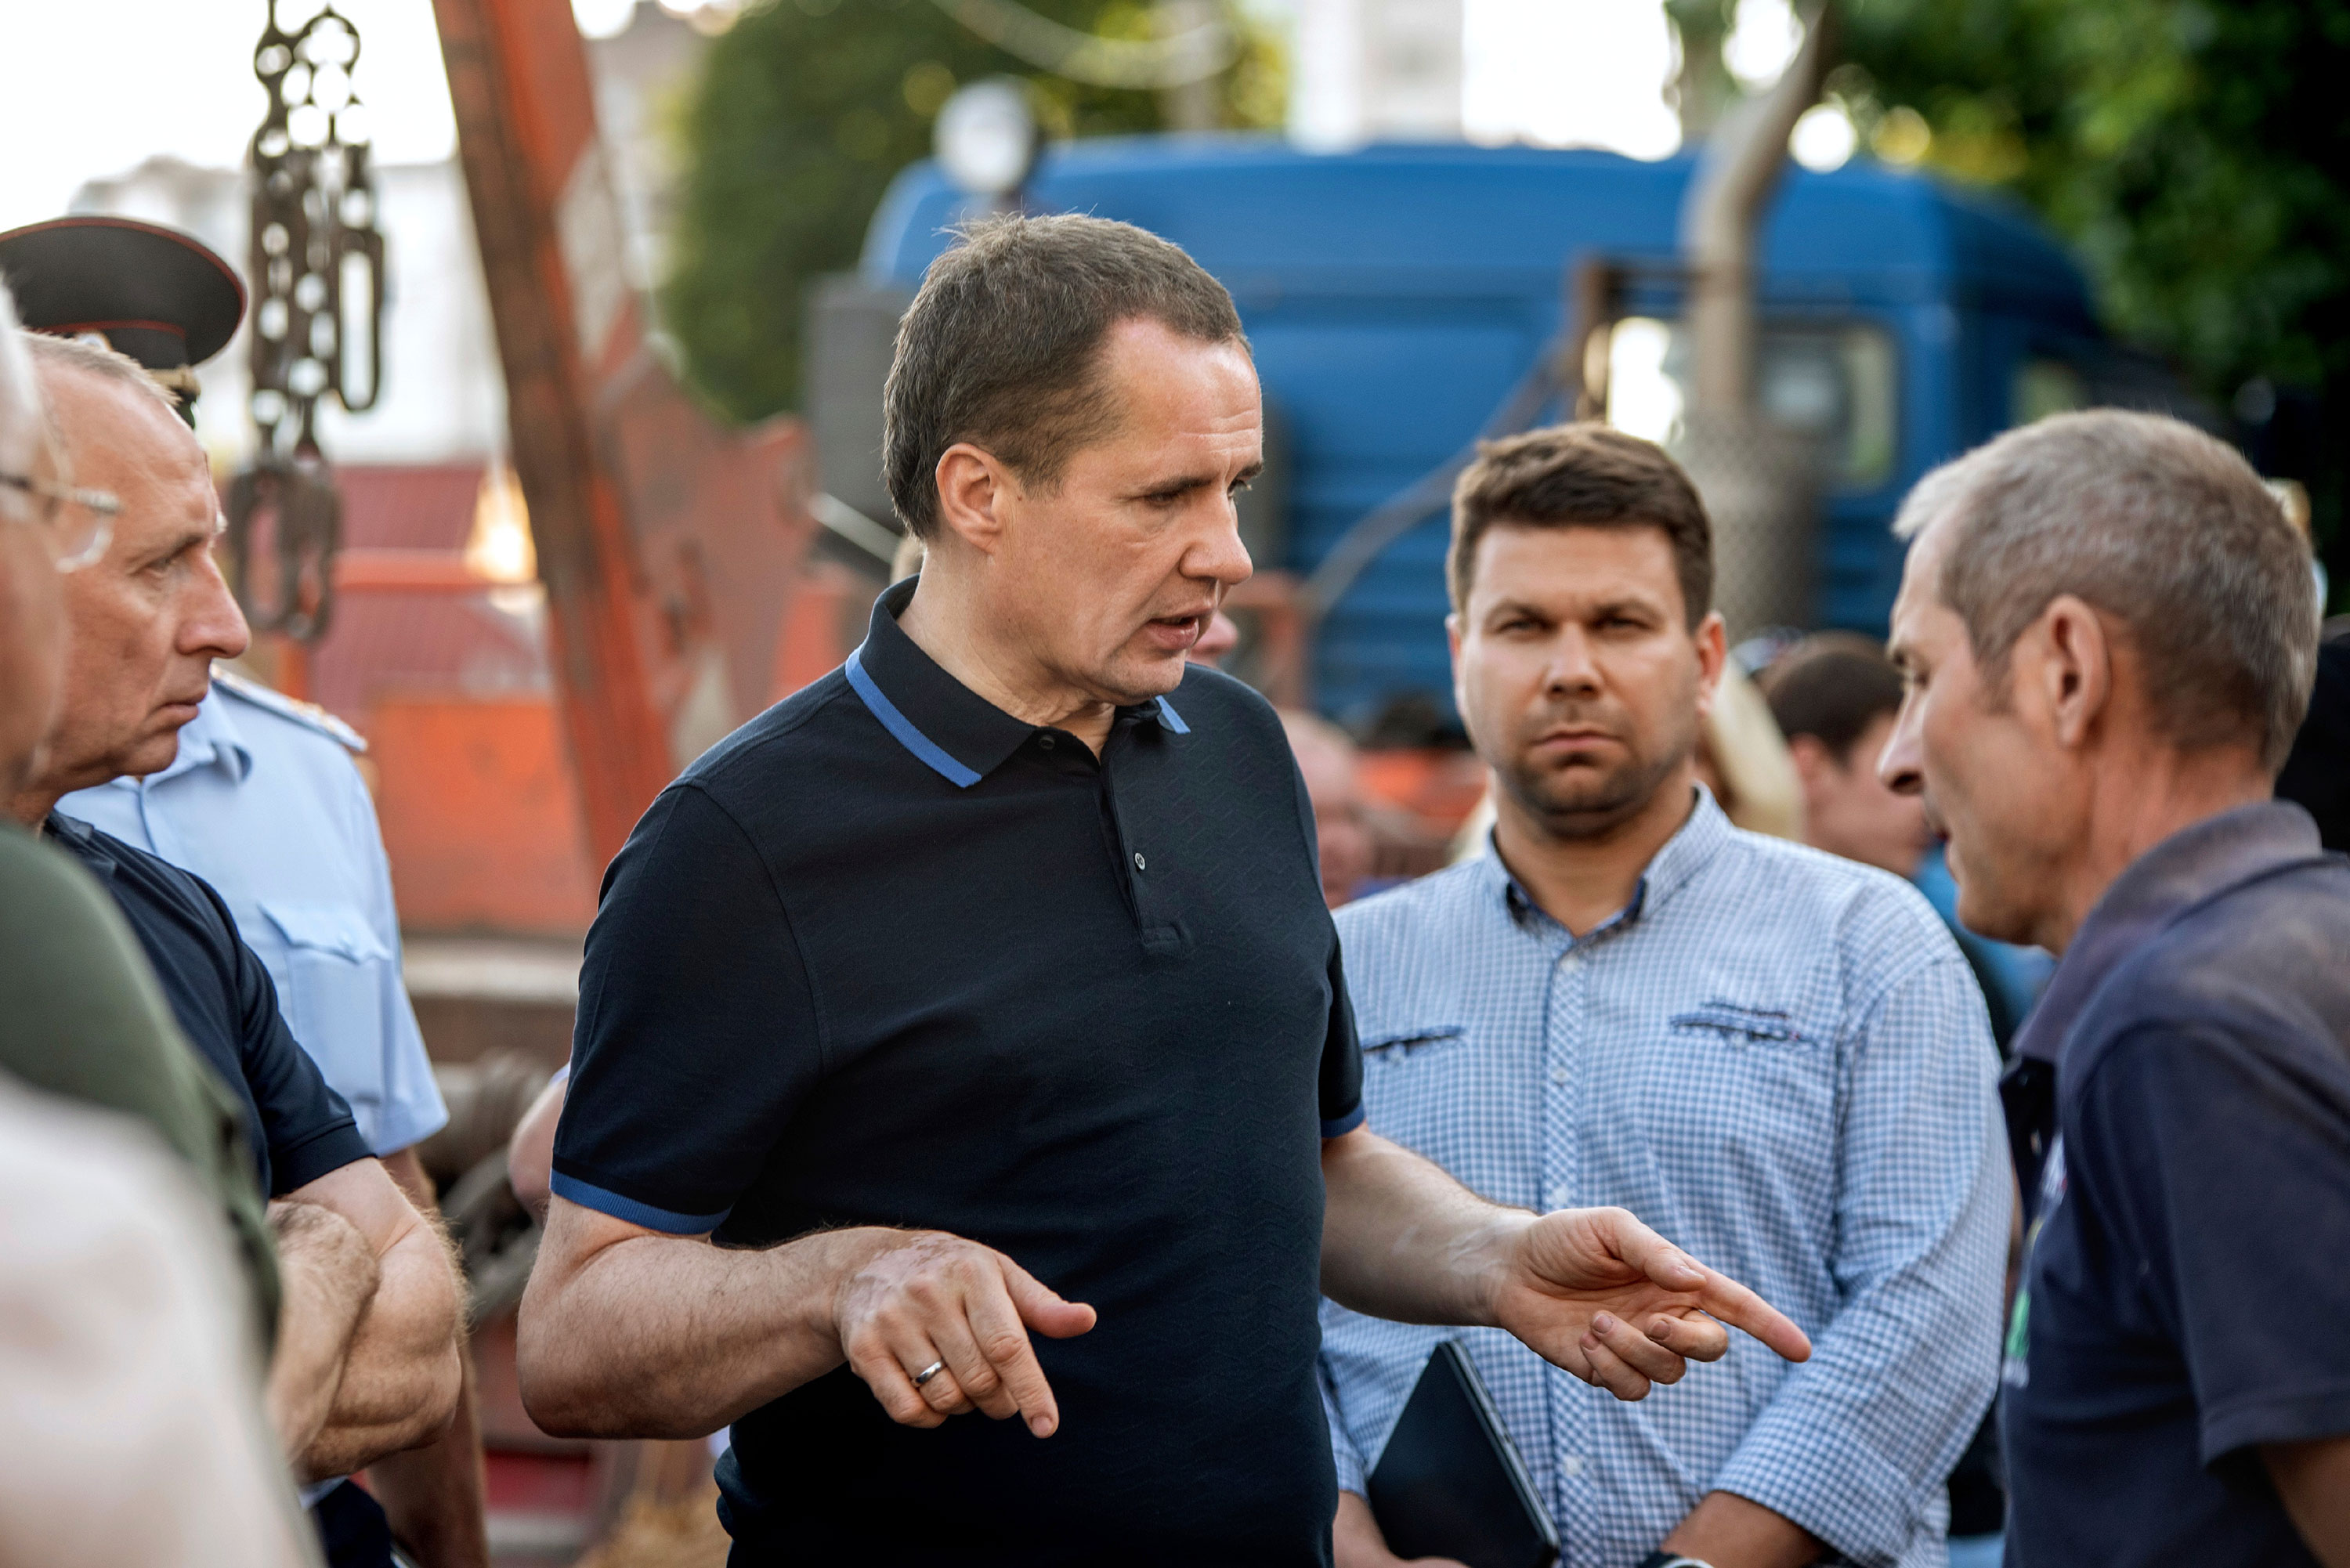 Vyacheslav Gladkov, center, speaks during a meeting with local residents in Belgorod, Russia, in July.